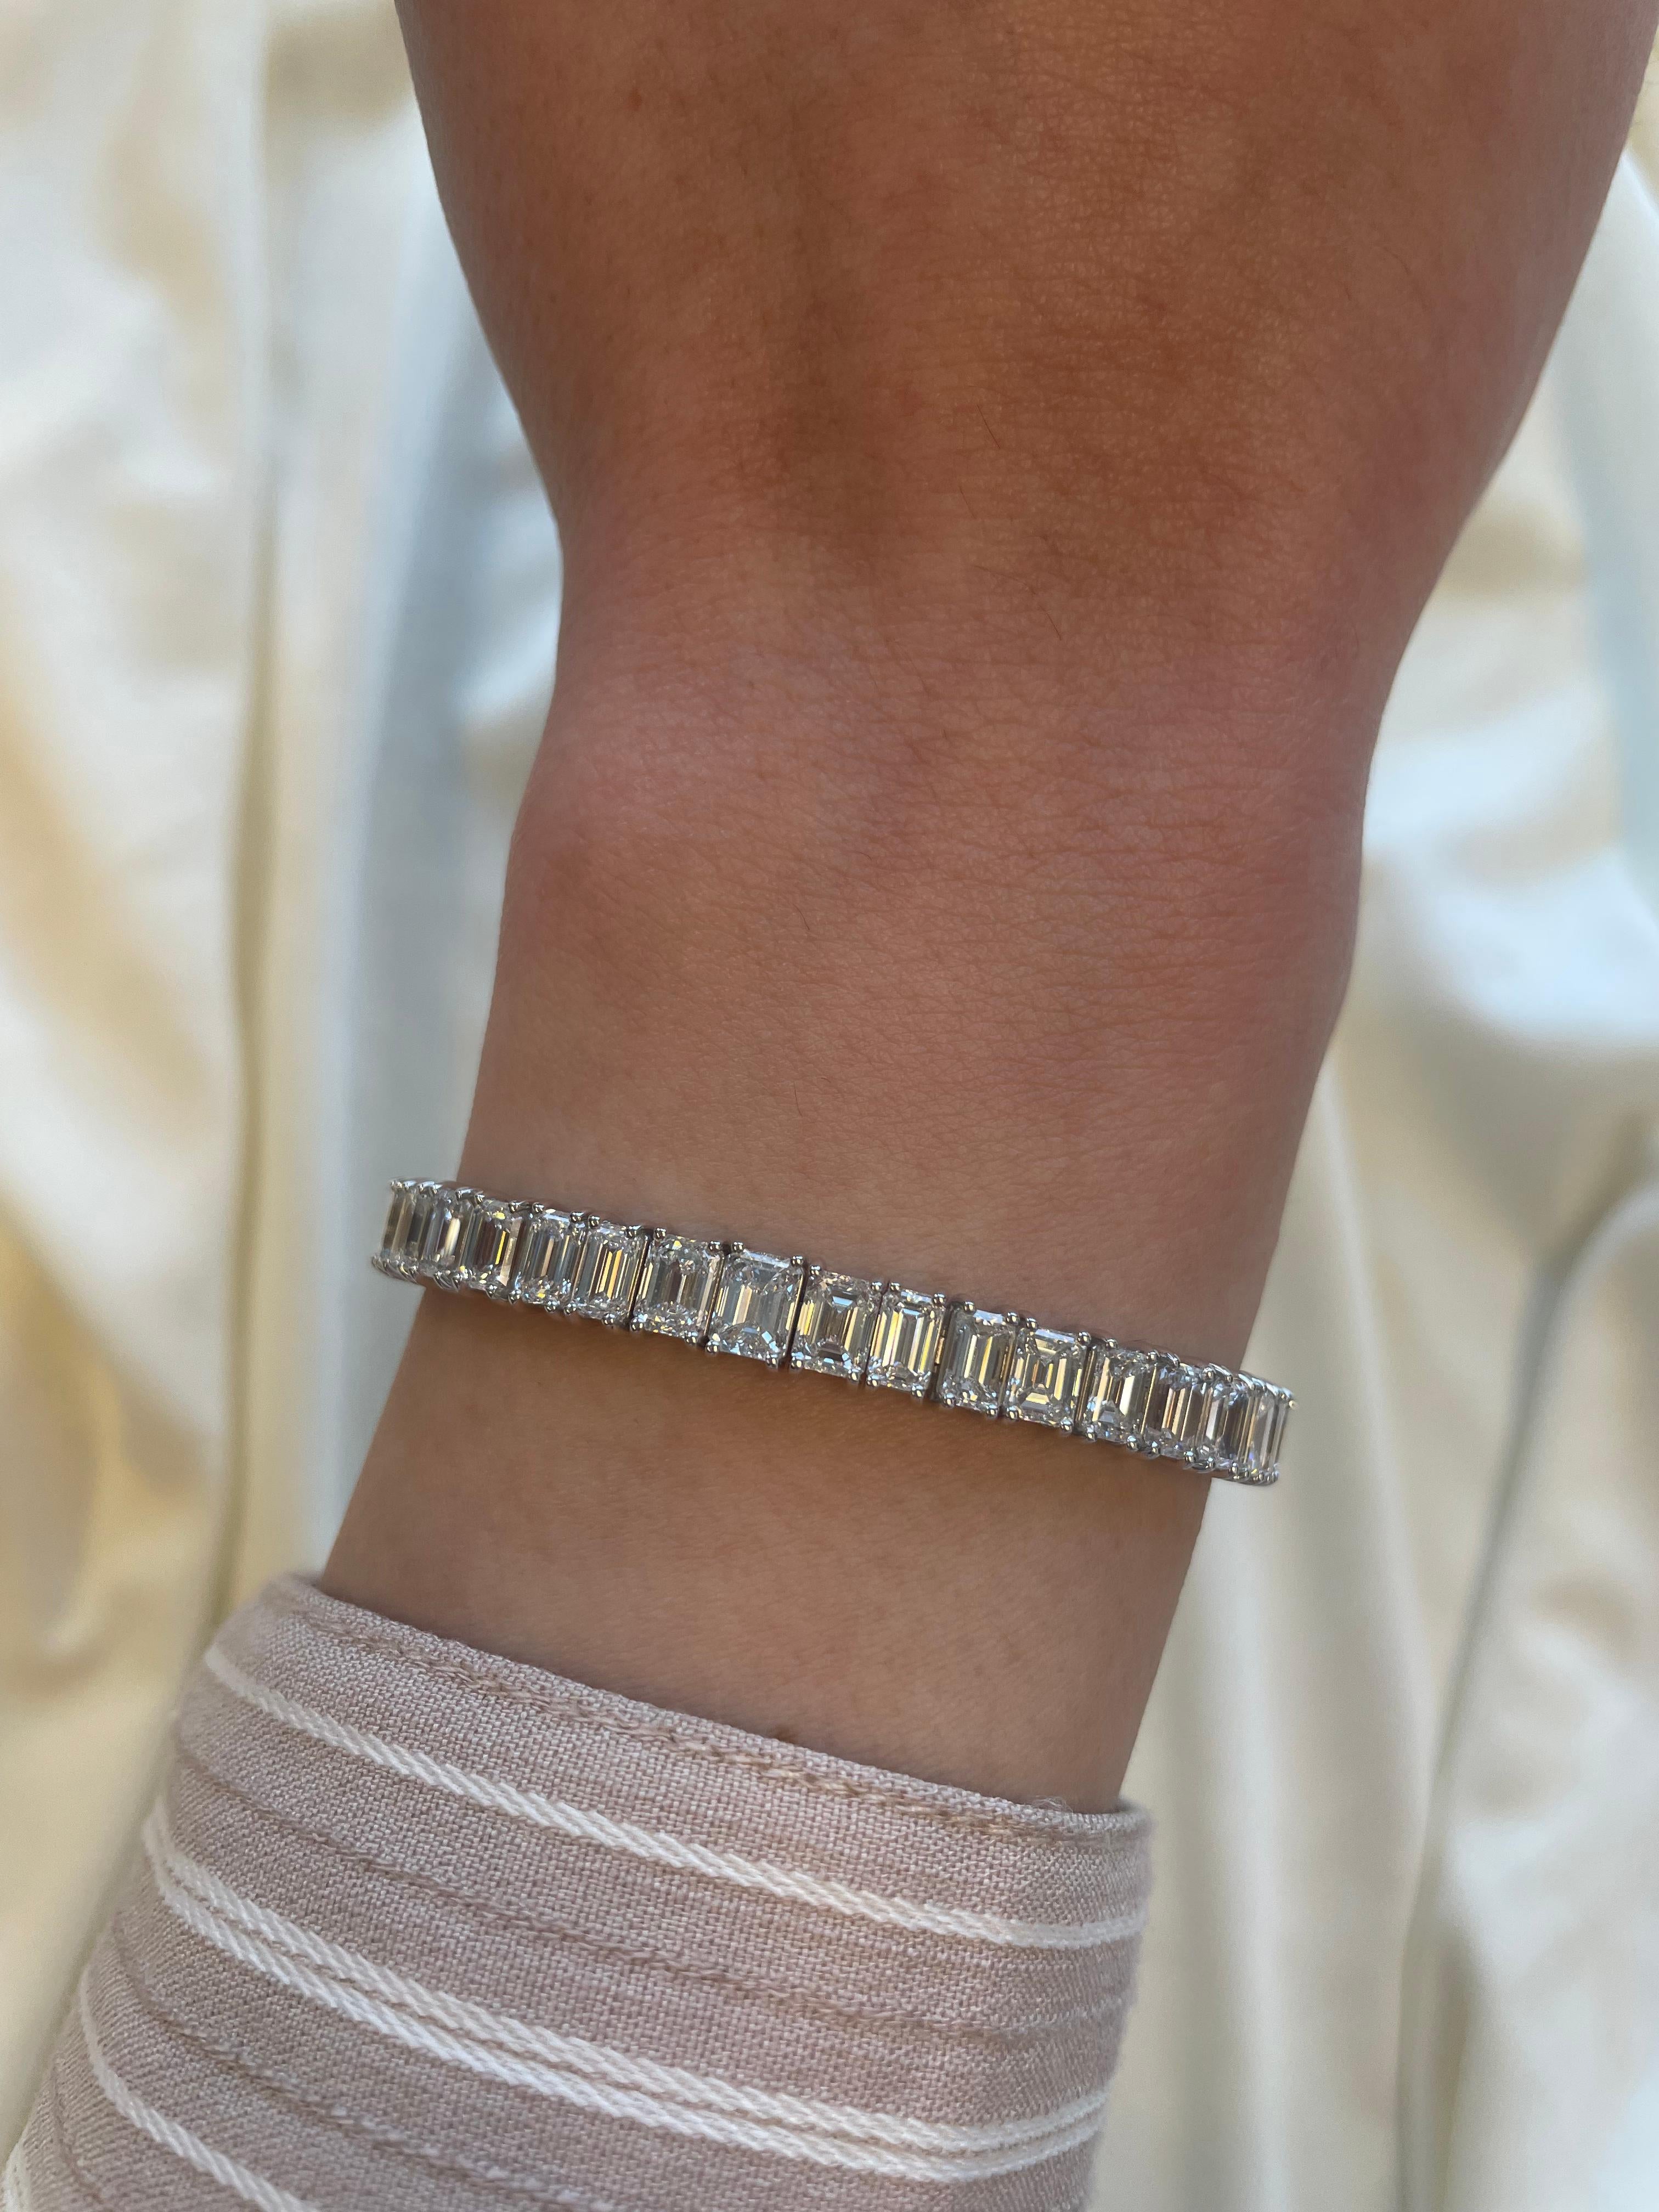 Stunning modern straight emerald cut diamond tennis bracelet. High jewelry by Alexander Beverly Hills.
50 emerald cut diamonds, 17.15 carats (apx 0.34ct each). Approximately H/I color and VS clarity. 18k white gold, 19.85 grams.
Accommodated with an